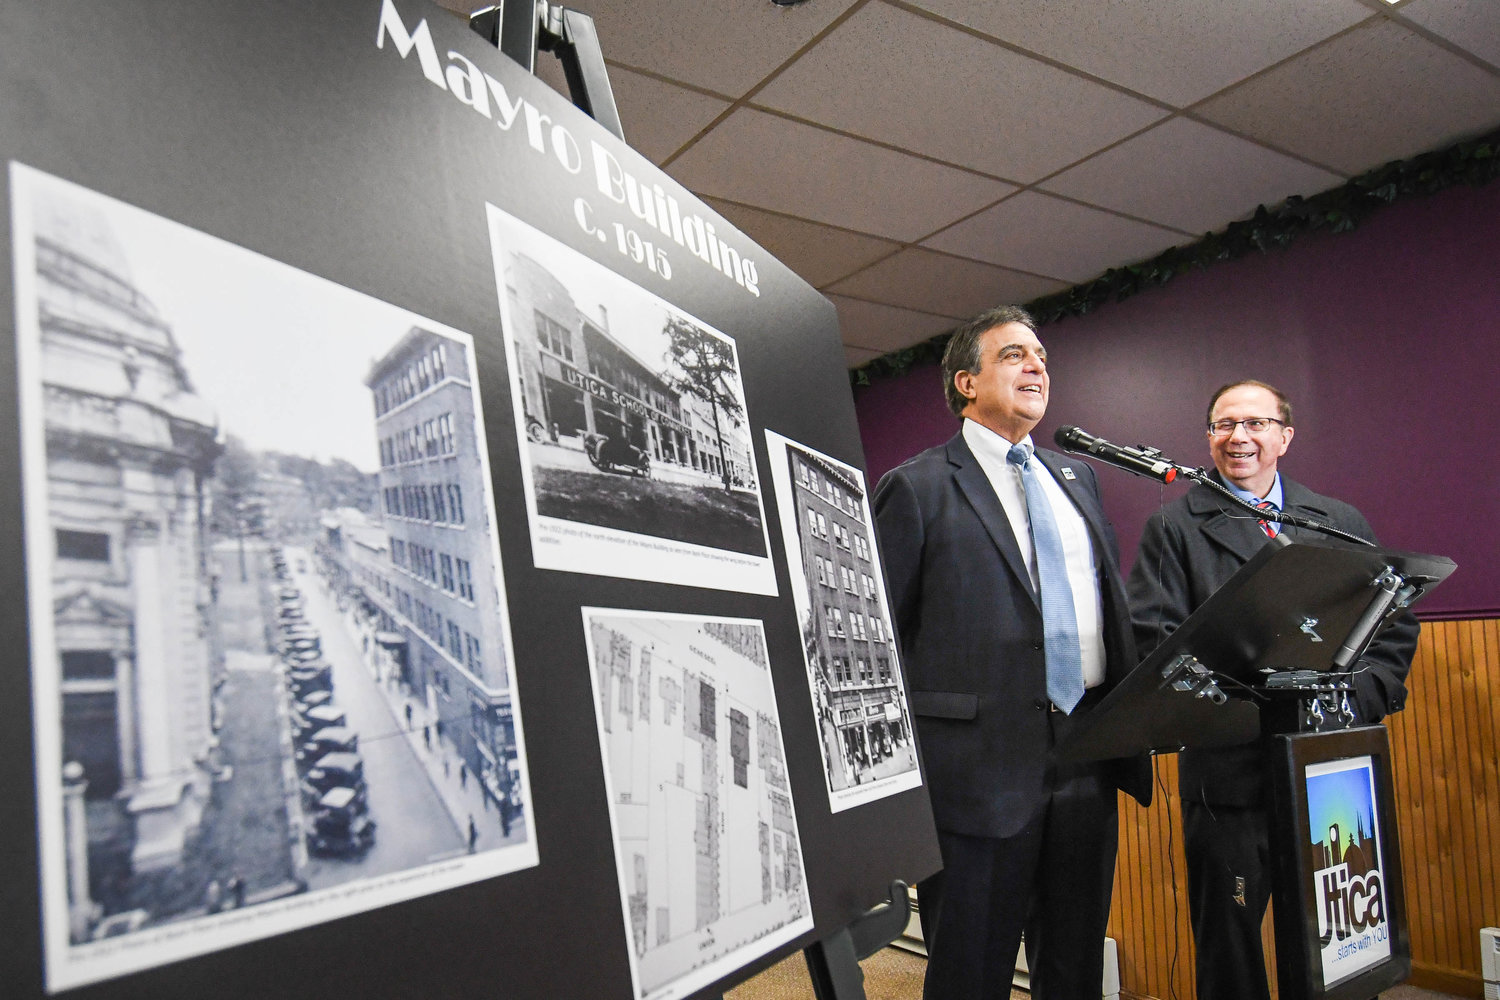 Utica Mayor Robert Palmieri and Senator Joseph Griffo speak during an announcement on Thursday regarding a $4 million award for funding toward the Mayro Building on Bank Pl. in Utica. Once completed, the Mayro Building will become a mixed-use building that hosts office space, 47 new market-rate apartments and various retail storefronts.